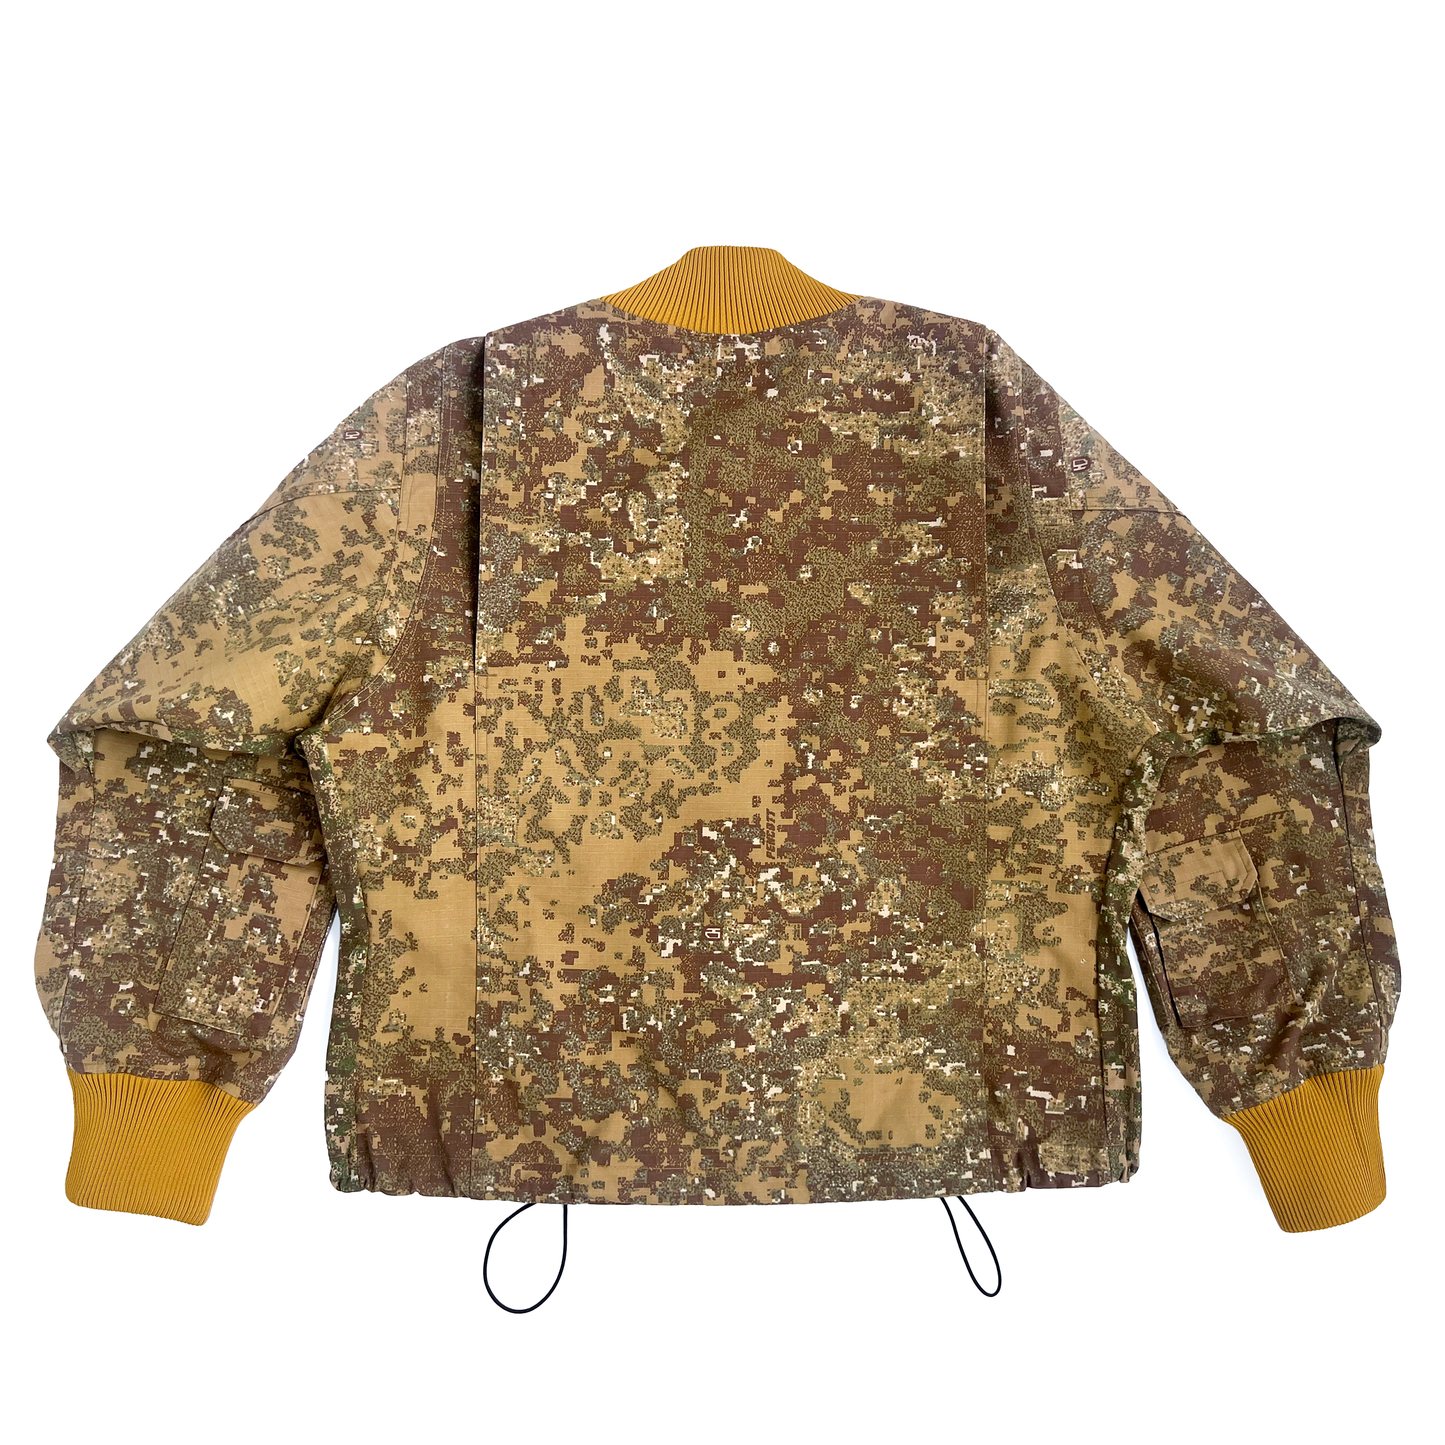 MILITARY FIELD JACKET (re-engineered 1 of 1)